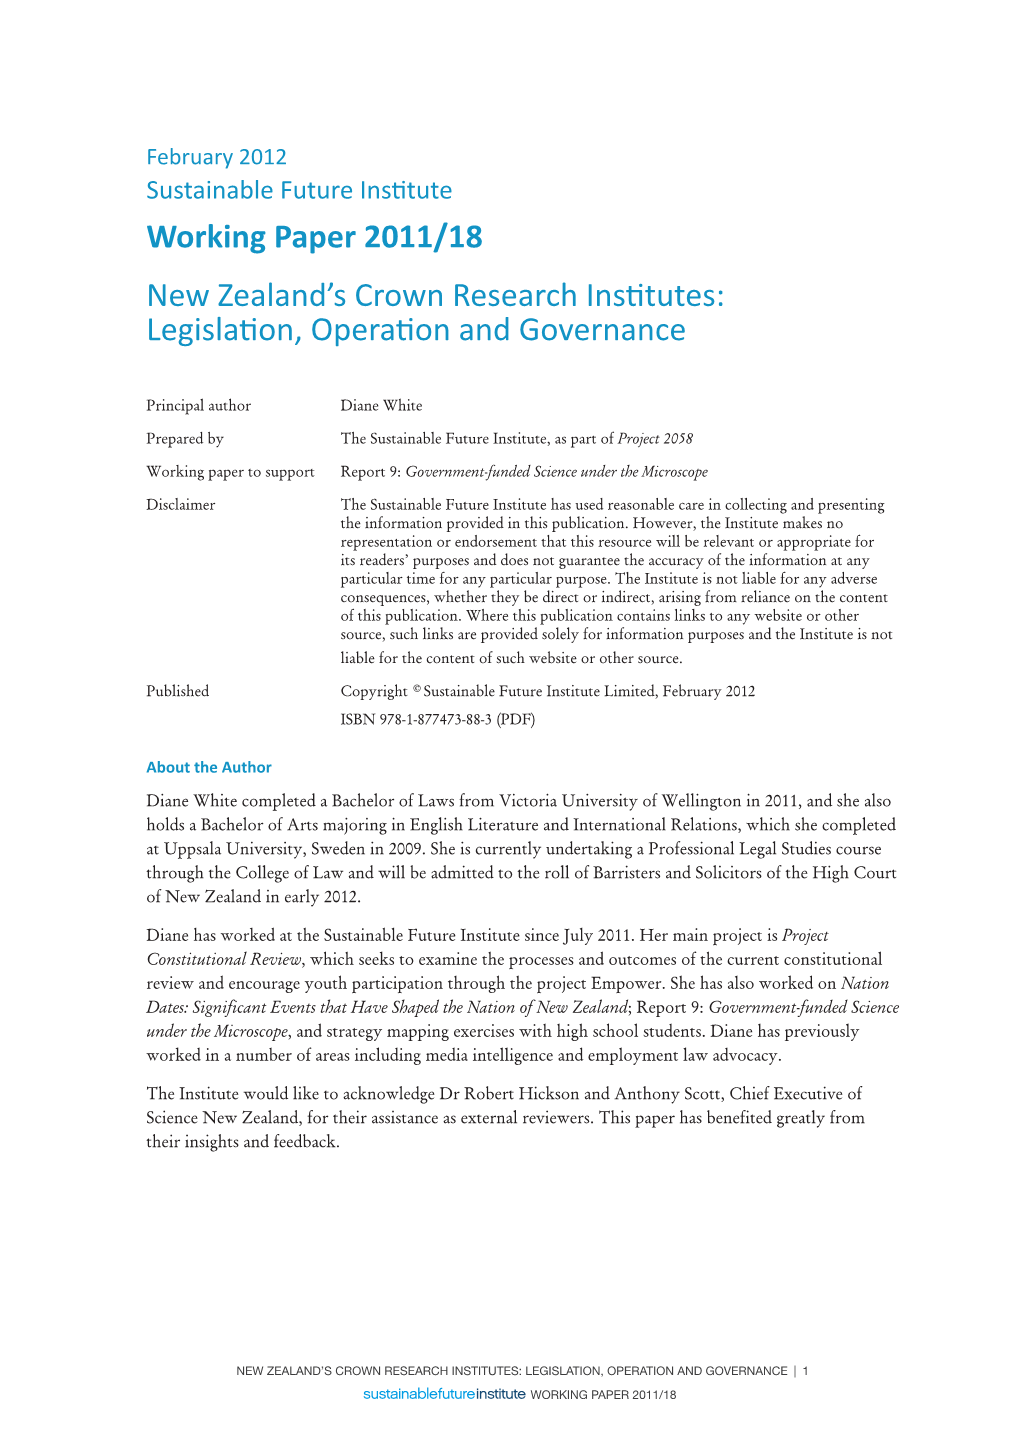 Working Paper 2011/18 New Zealand's Crown Research Institutes